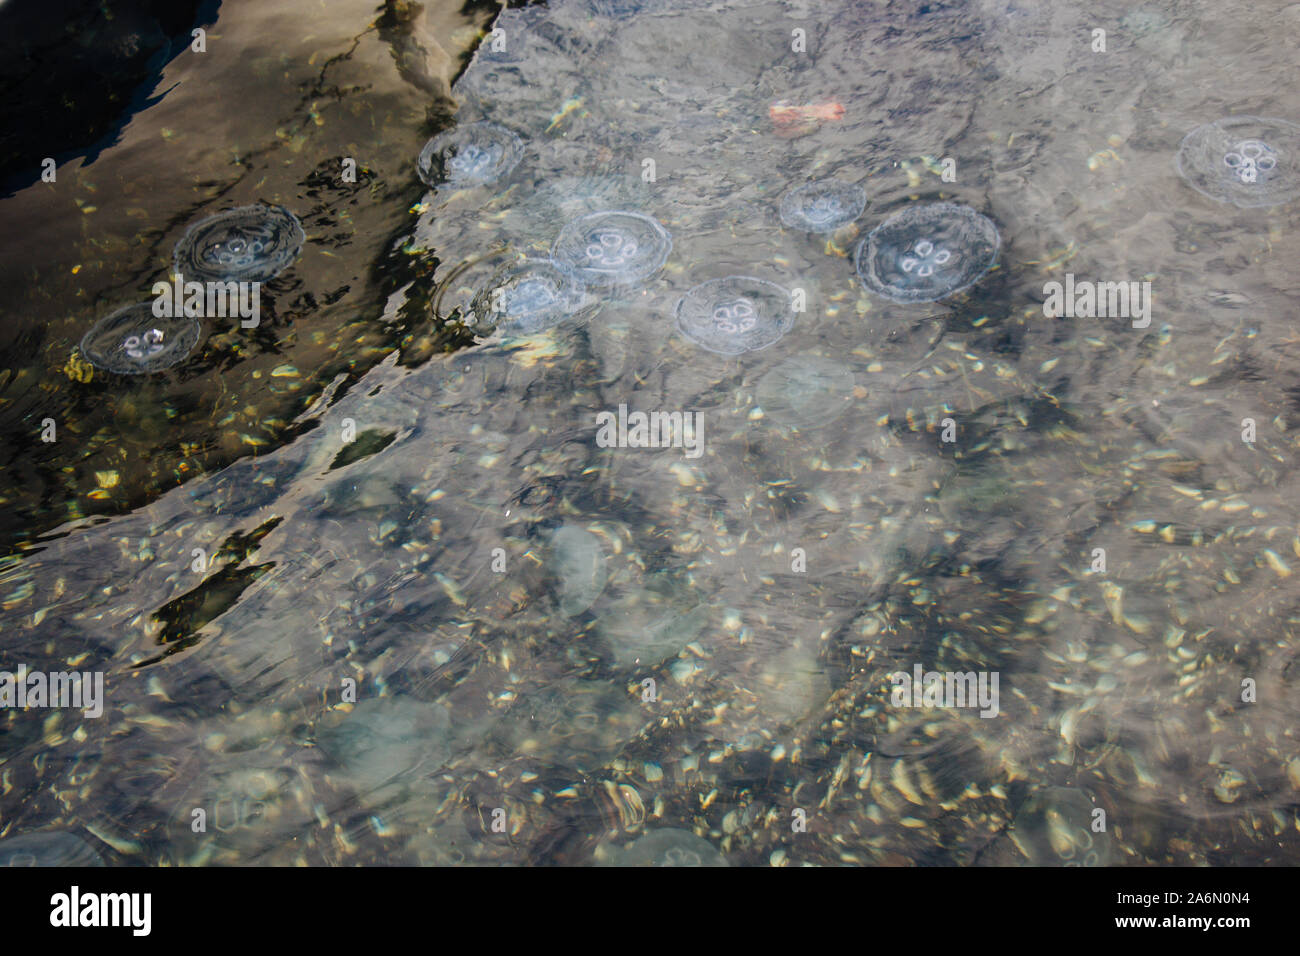 Jellyfish in the water in the view Stock Photo